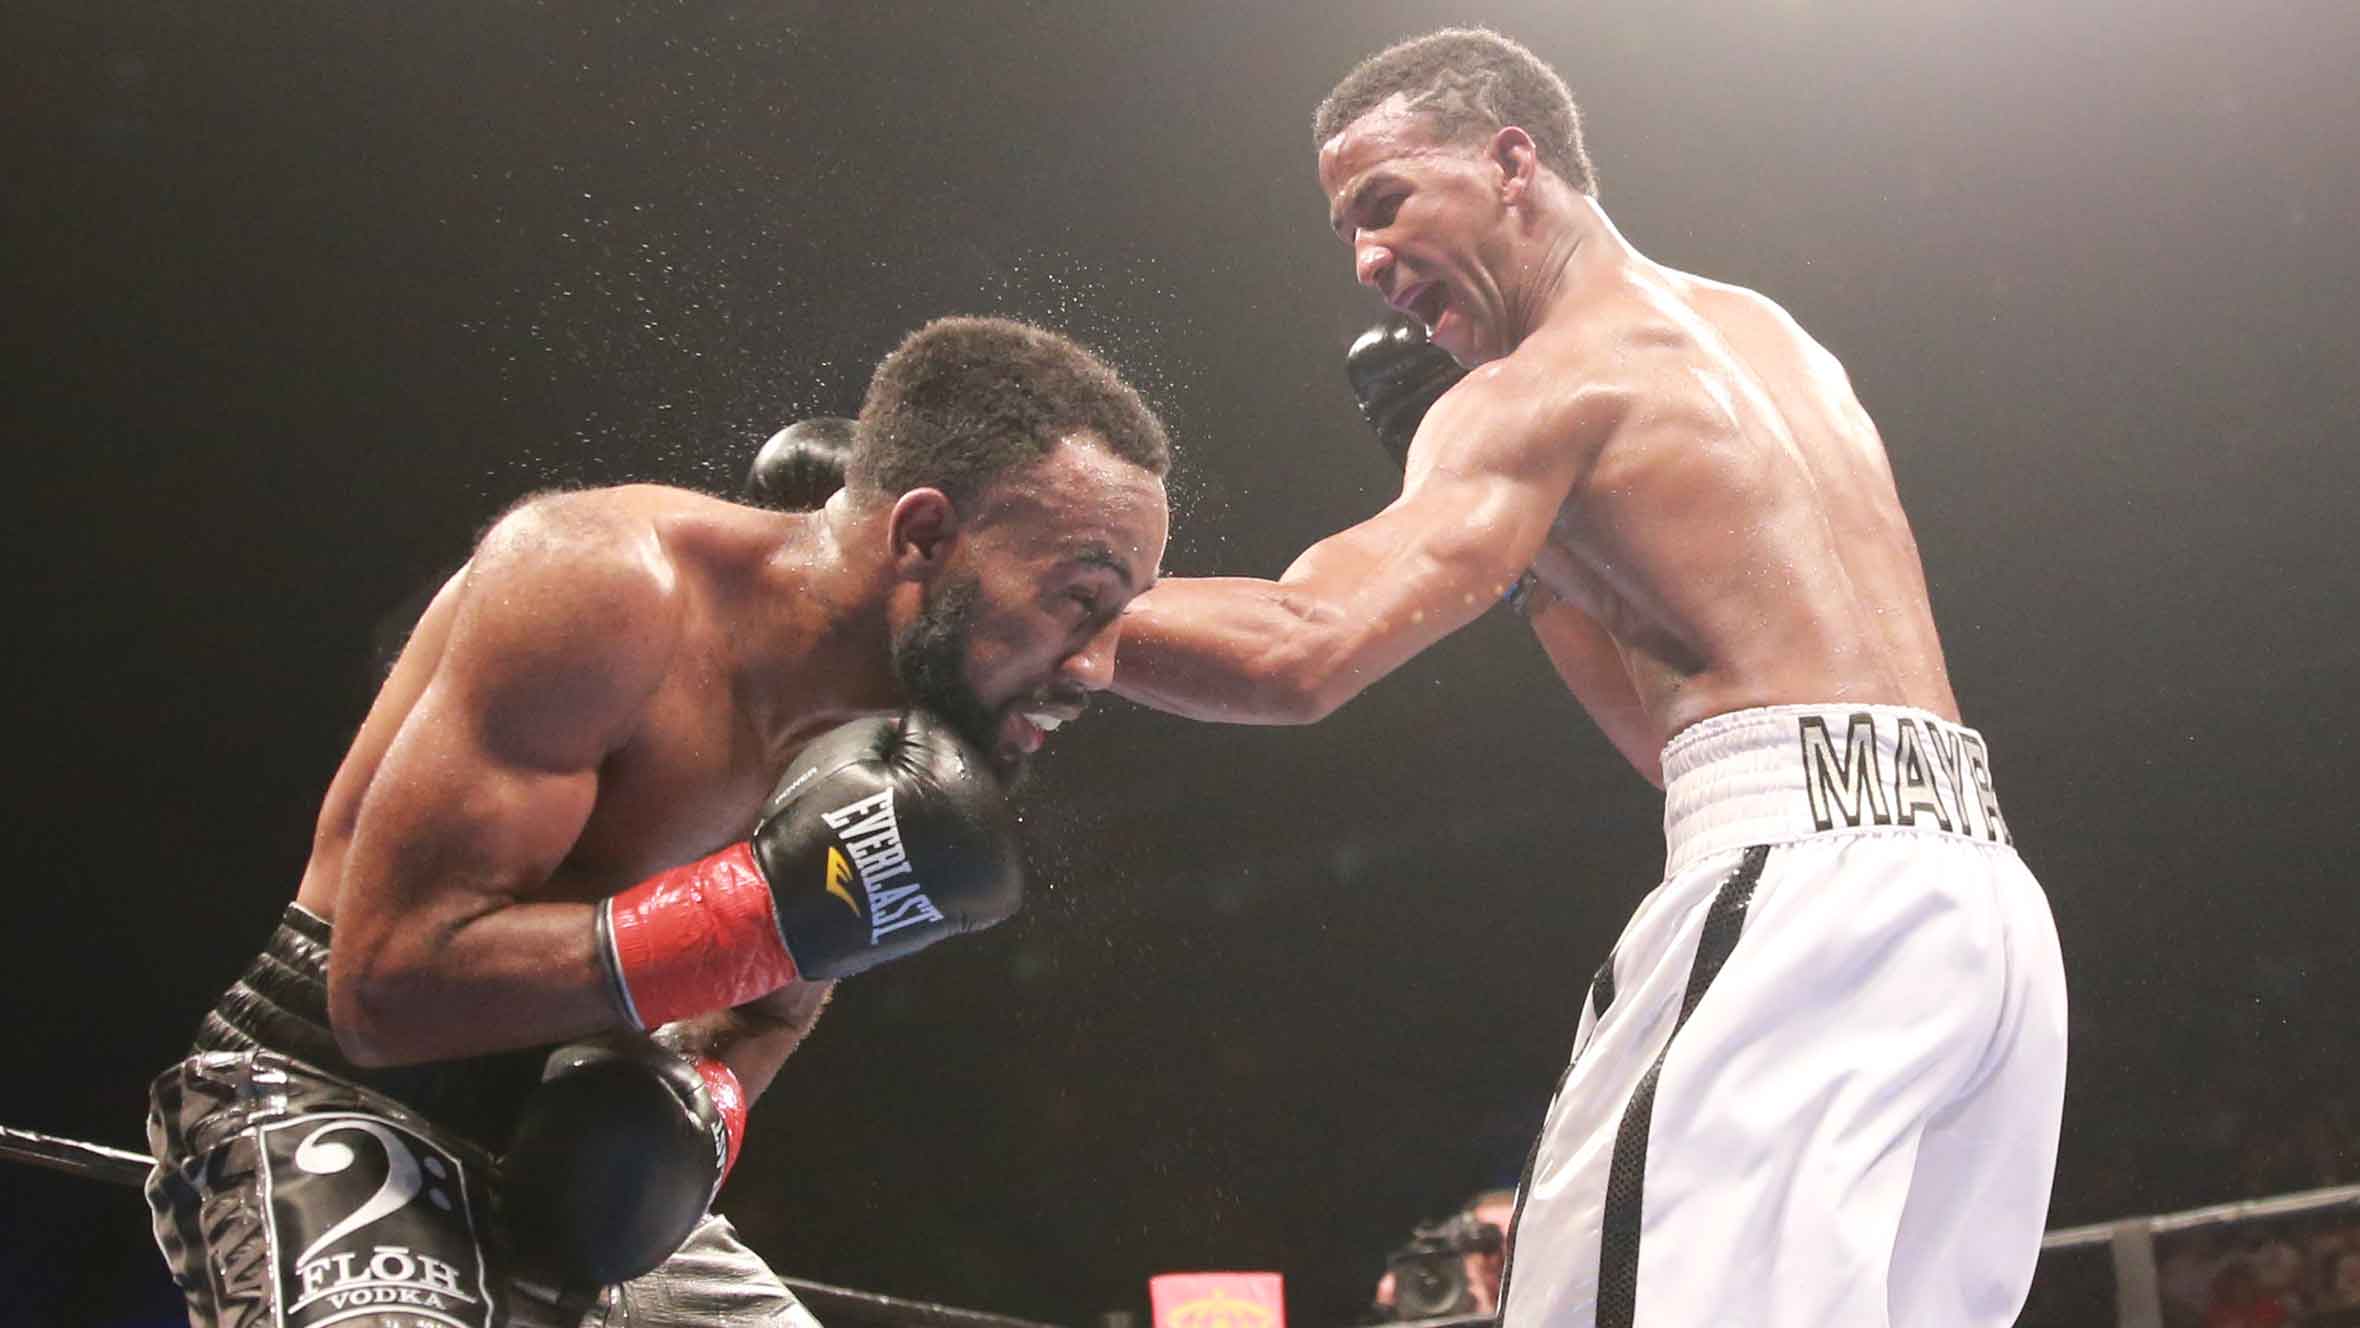 Barthelemy overcomes adversity, outworks Bey to retain 135-pound title